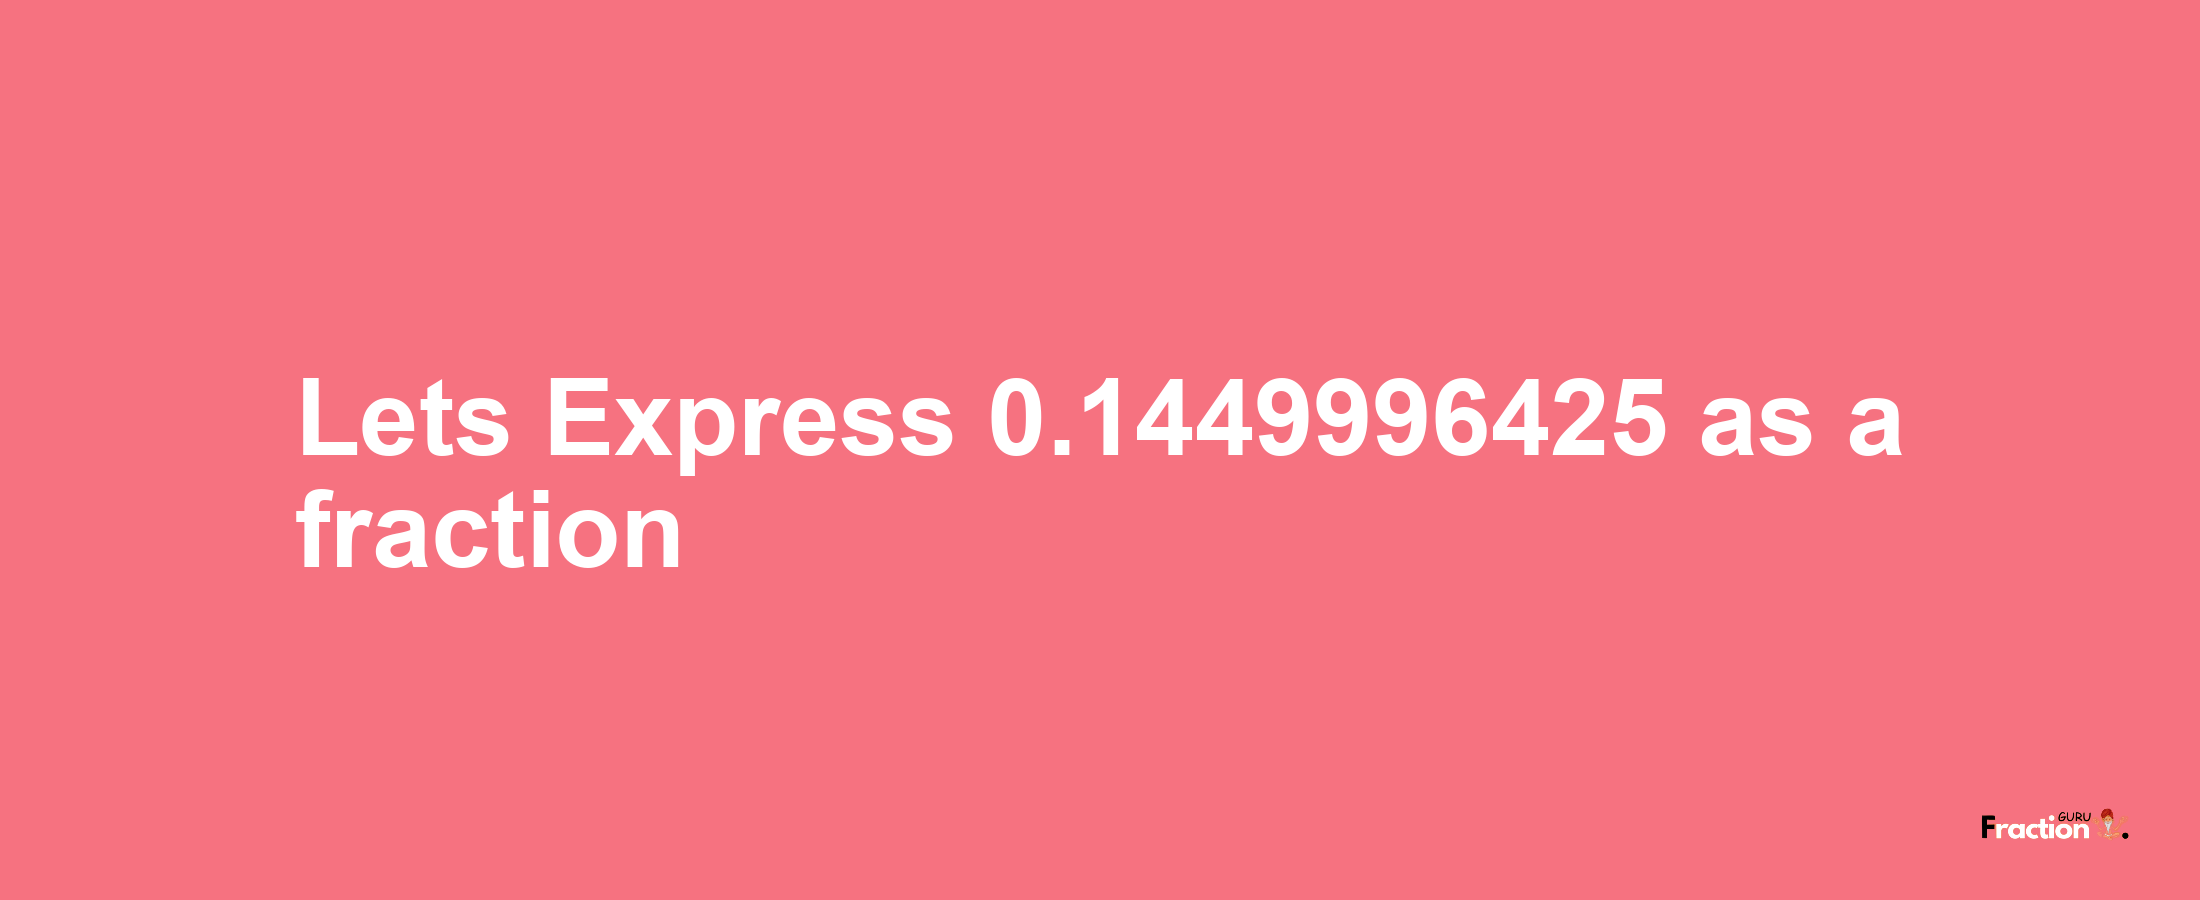 Lets Express 0.1449996425 as afraction